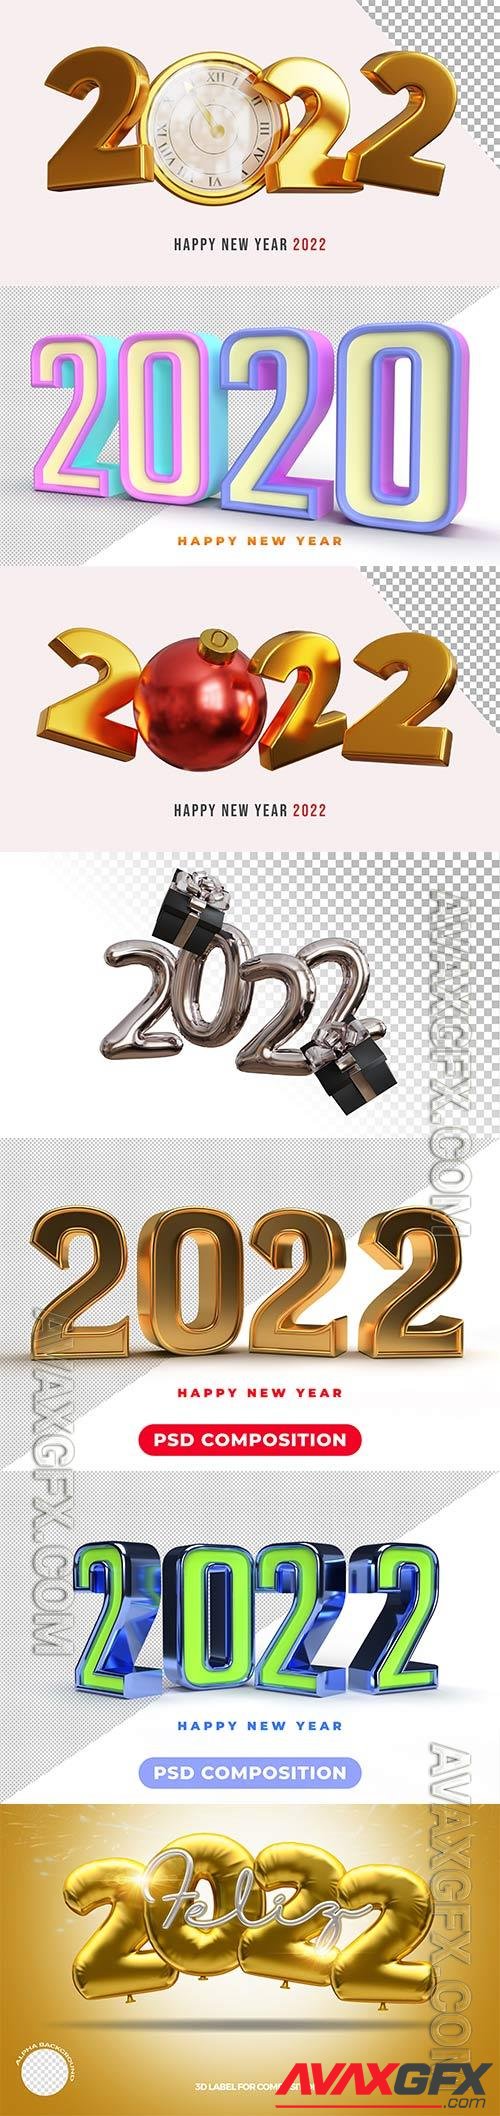 3d text happy new year 2022 psd design